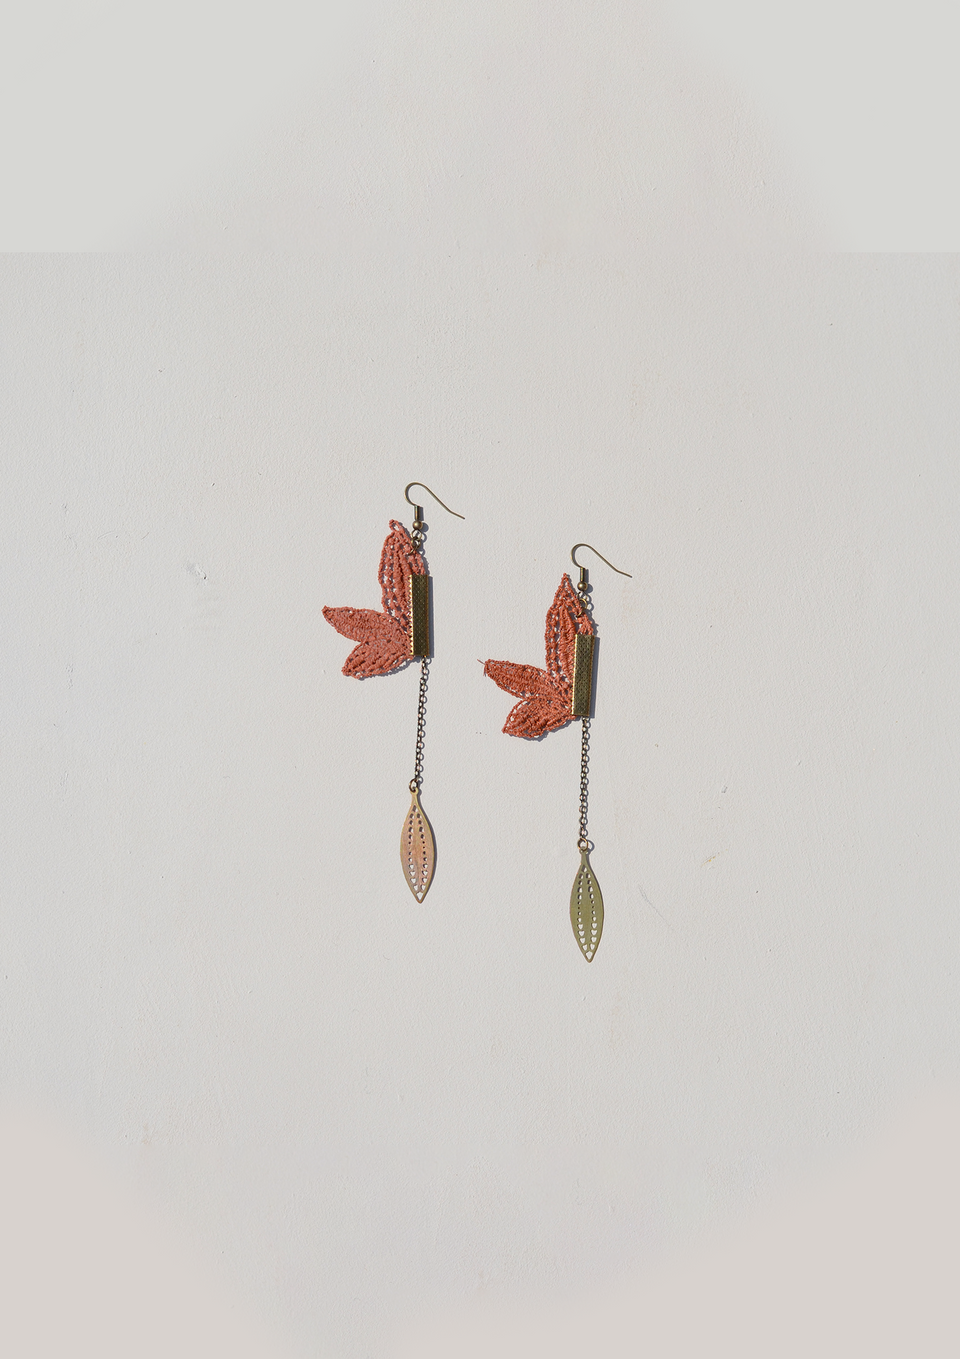 Pendulum Earrings - ANTHER a shop